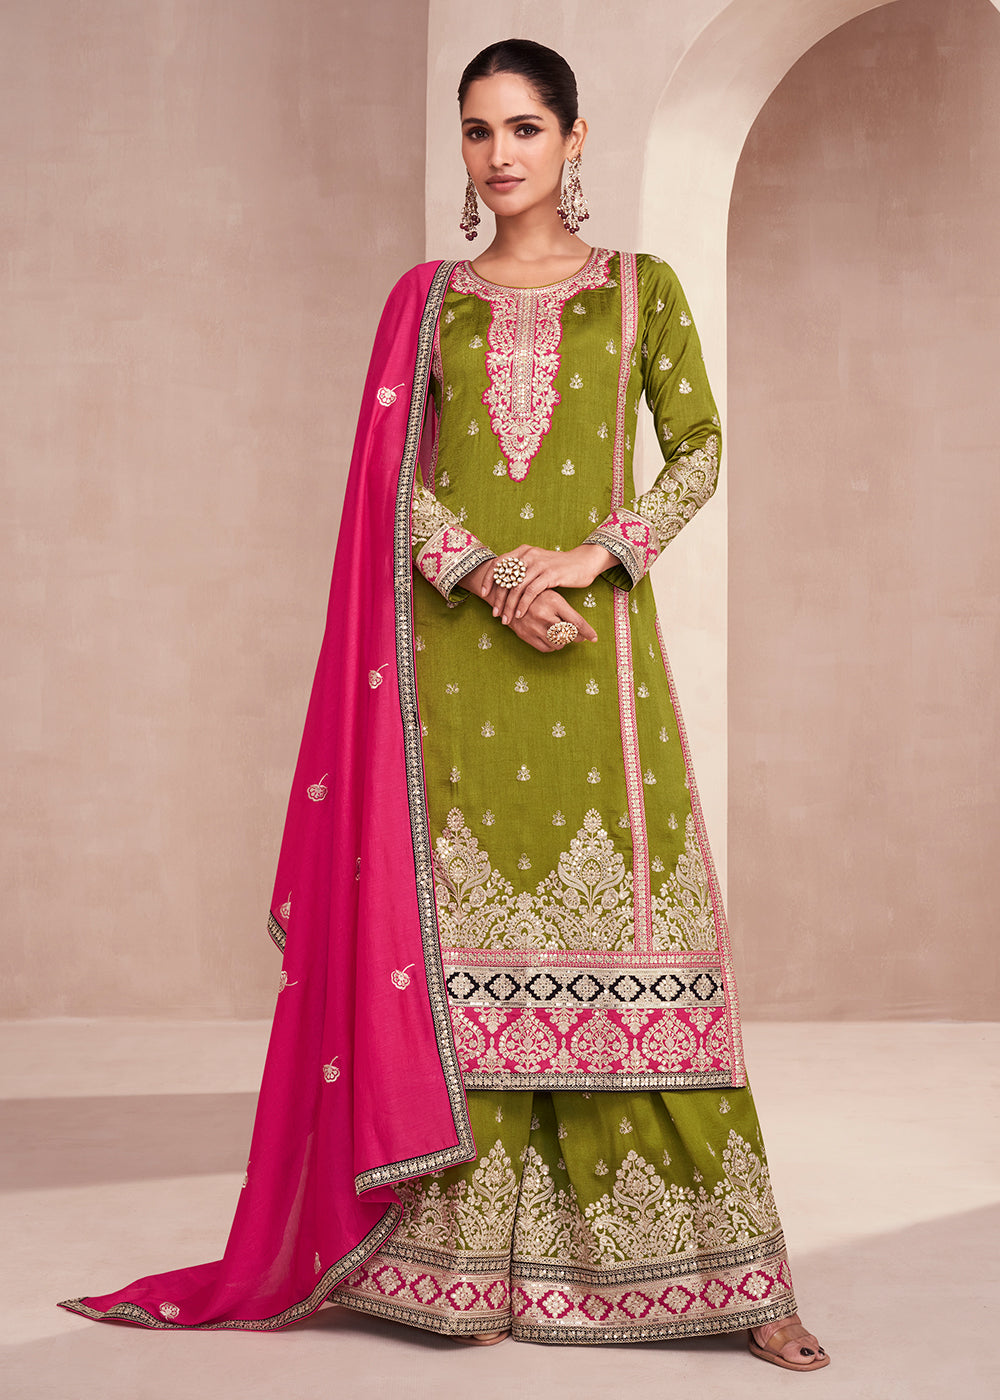 Buy Now Green Embroidered Premium Silk Palazzo Suit with Pink Dupatta Online in USA, UK, Canada, Germany, Australia & Worldwide at Empress Clothing.